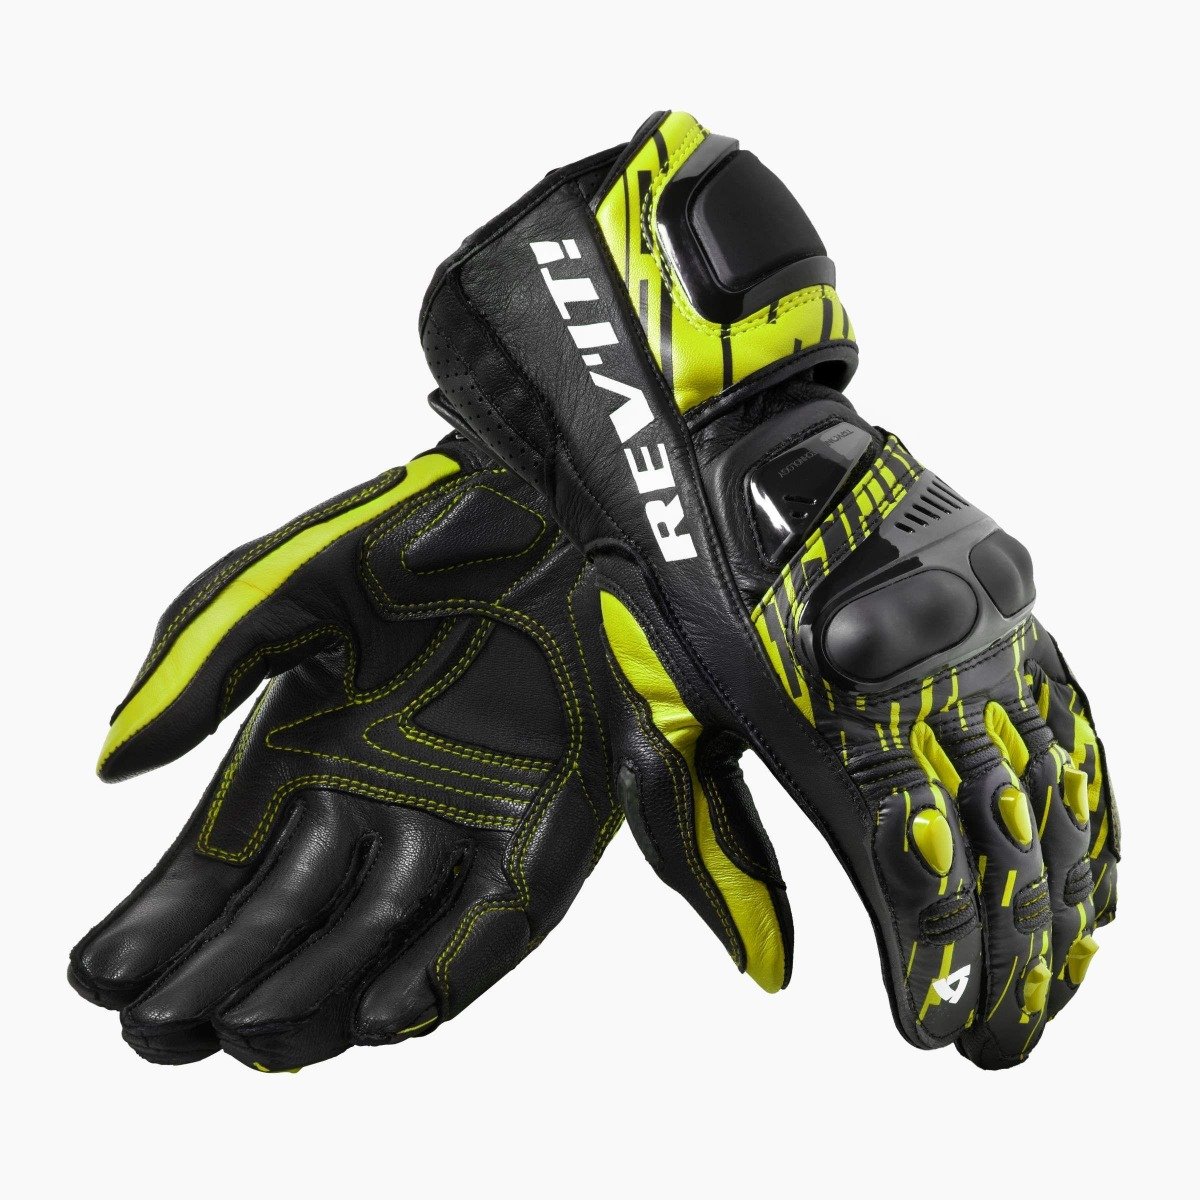 Image of REV'IT! Quantum 2 Neon Yellow Black Motorcycle Gloves Size L ID 8700001308854